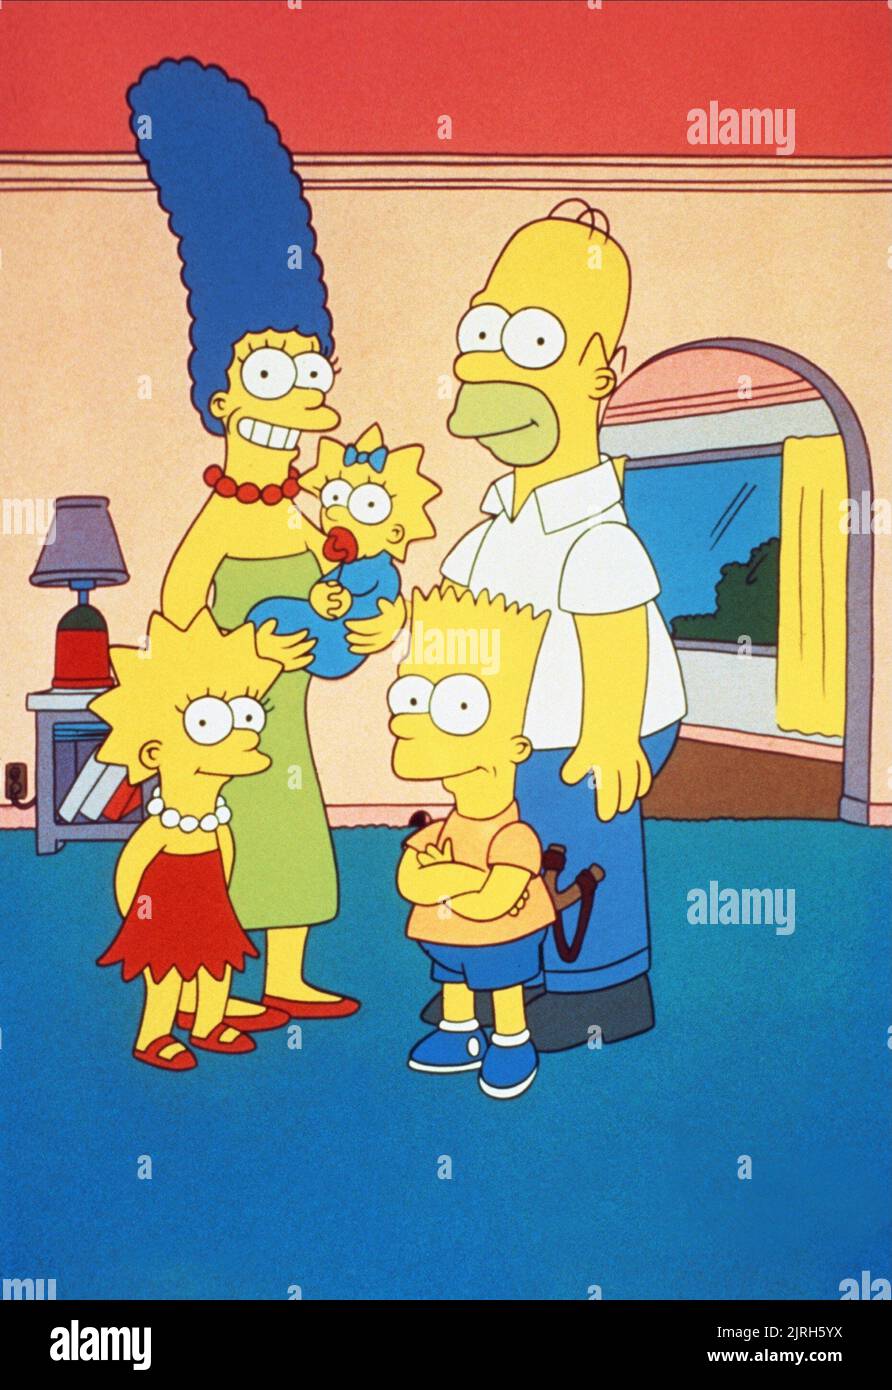 LISA, MARGE, MAGGIE, HOMER, BART SIMPSON, THE SIMPSONS, 1989 Stock Photo